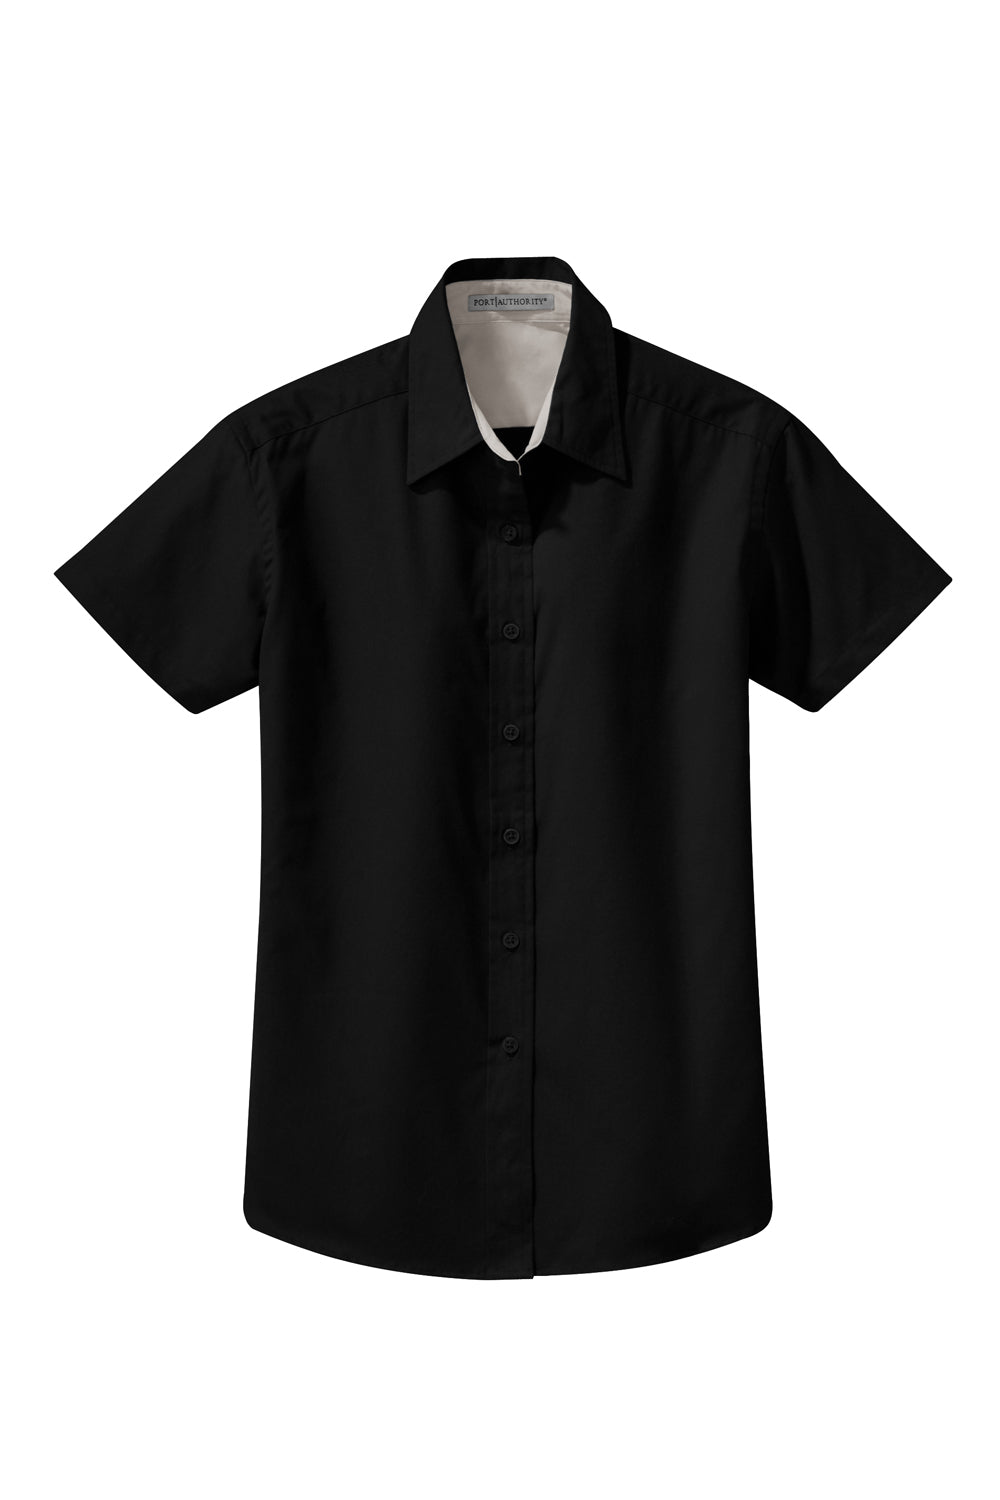 Port Authority L508 Womens Easy Care Wrinkle Resistant Short Sleeve Button Down Shirt Black Flat Front